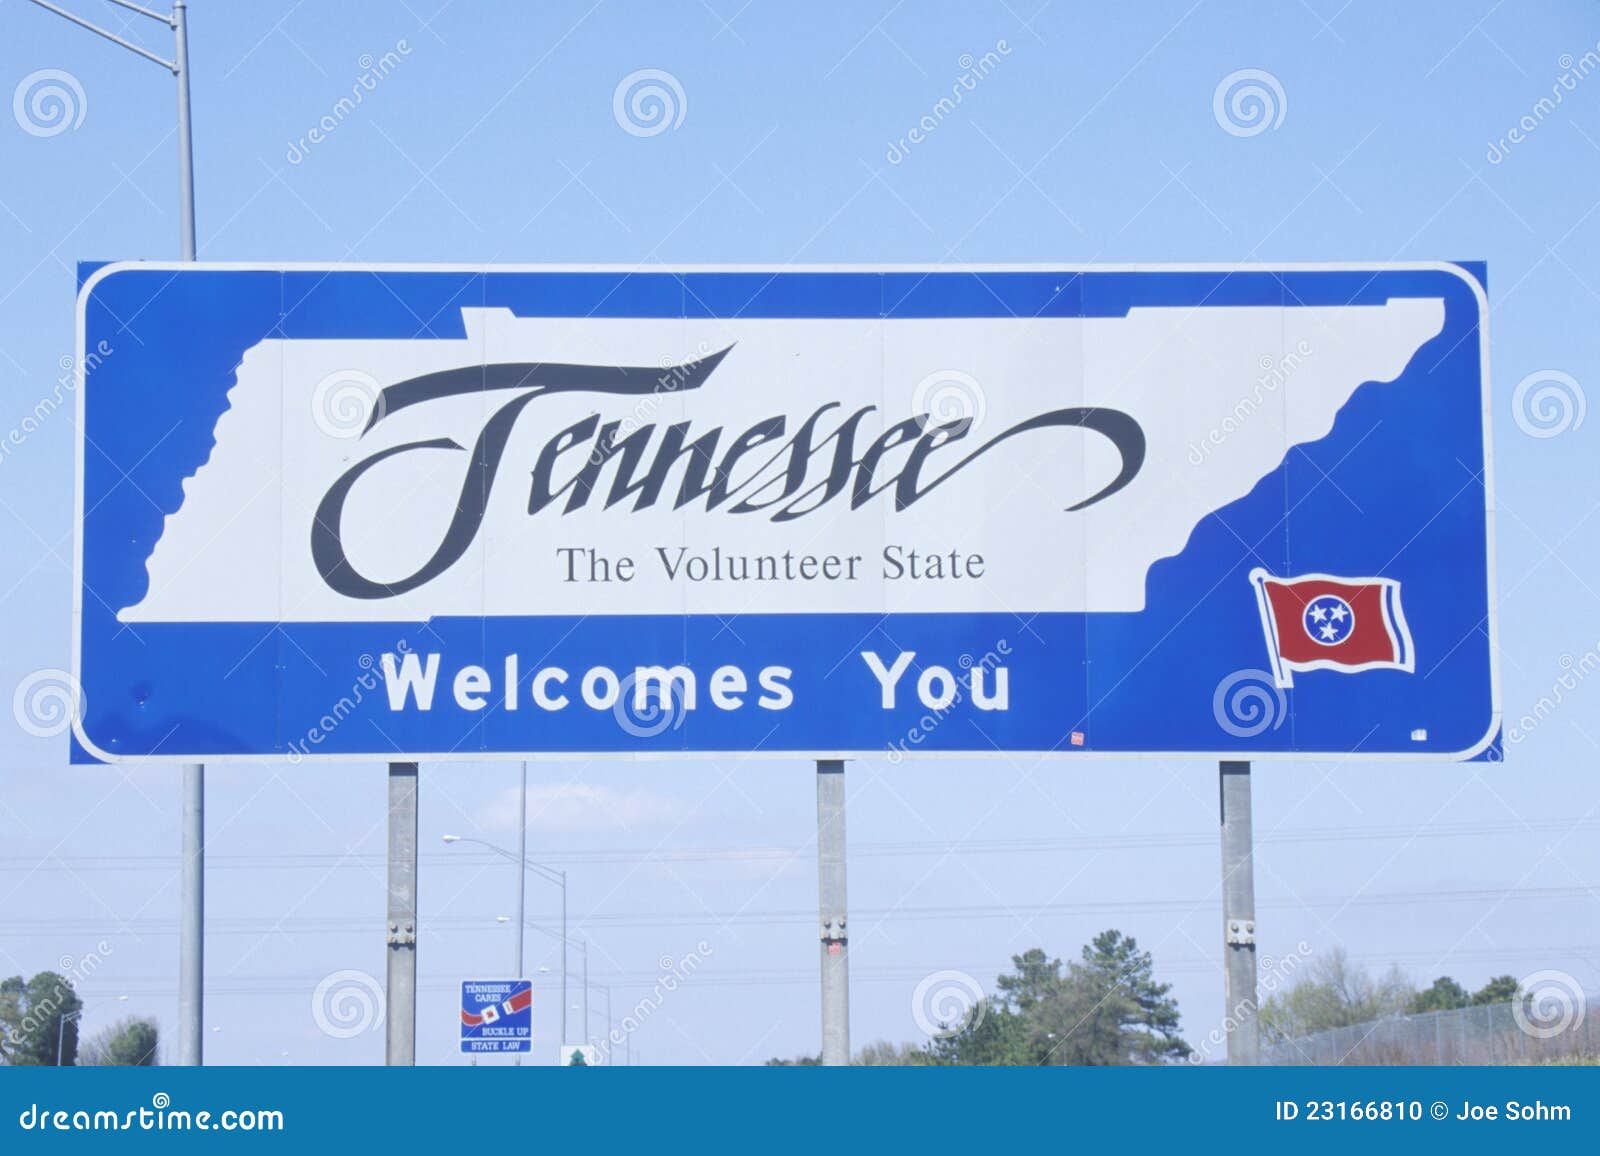 welcome to tennessee sign